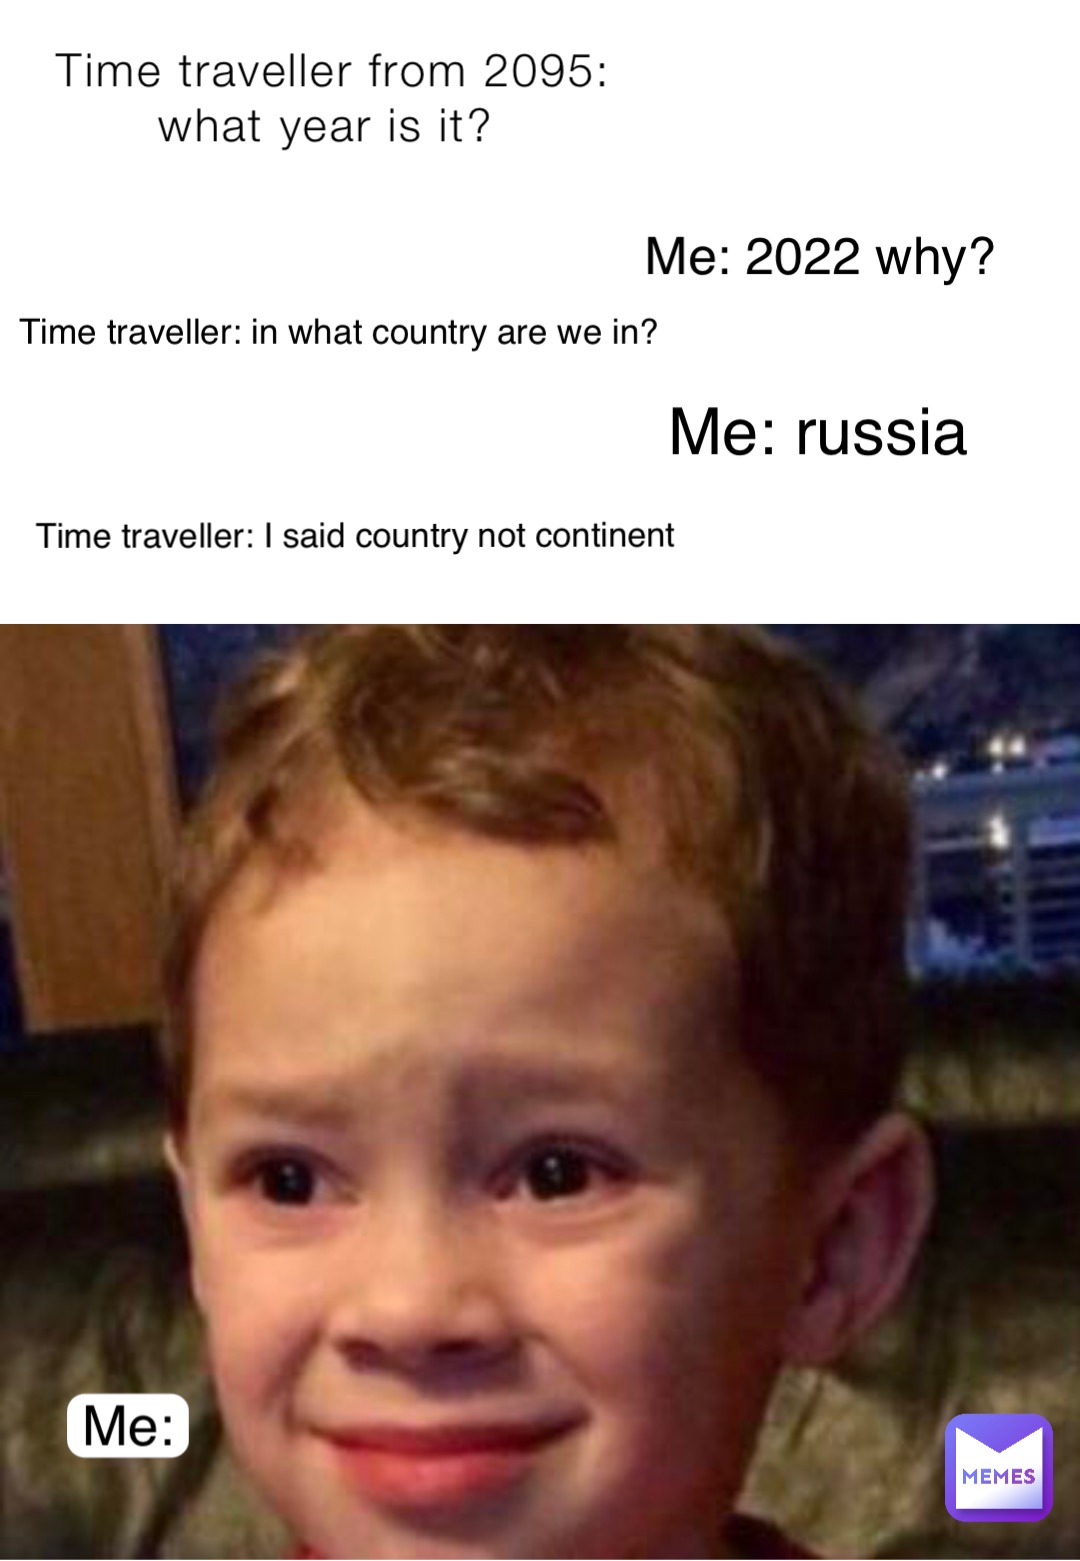 Time traveller from 2095: what year is it? Time traveller: in what country are we in? Me: 2022 why? Me: russia Time traveller: I said country not continent Me: